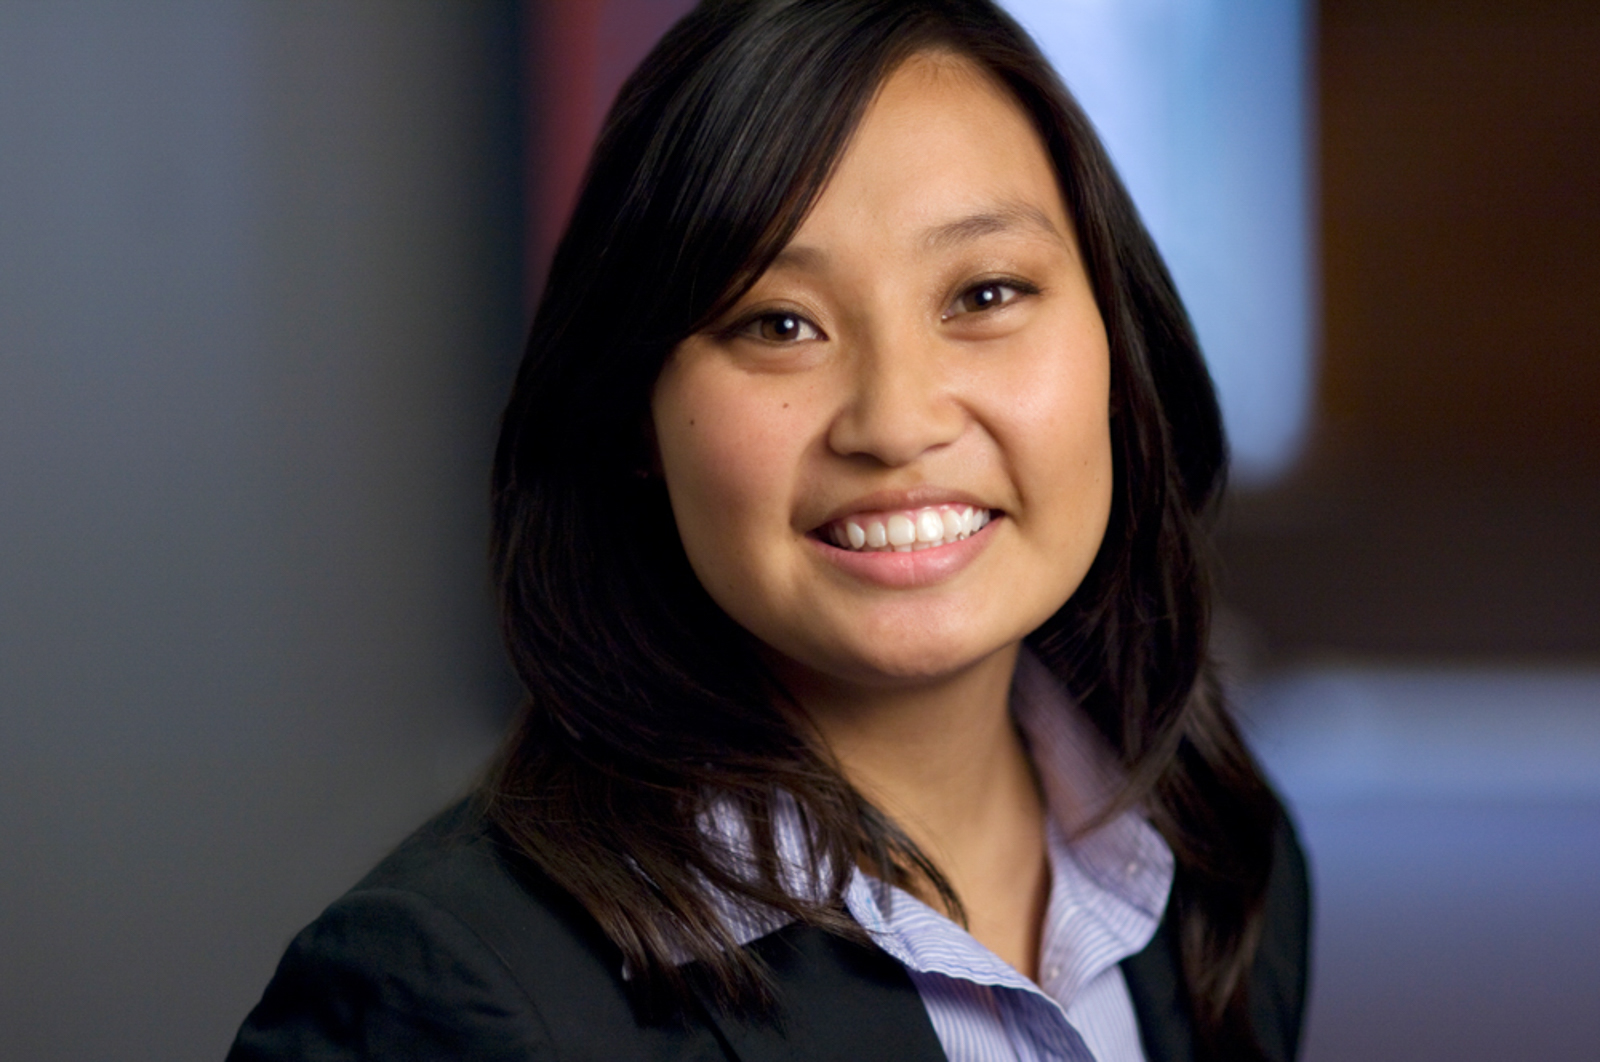 Portrait of young woman smiling in office setup